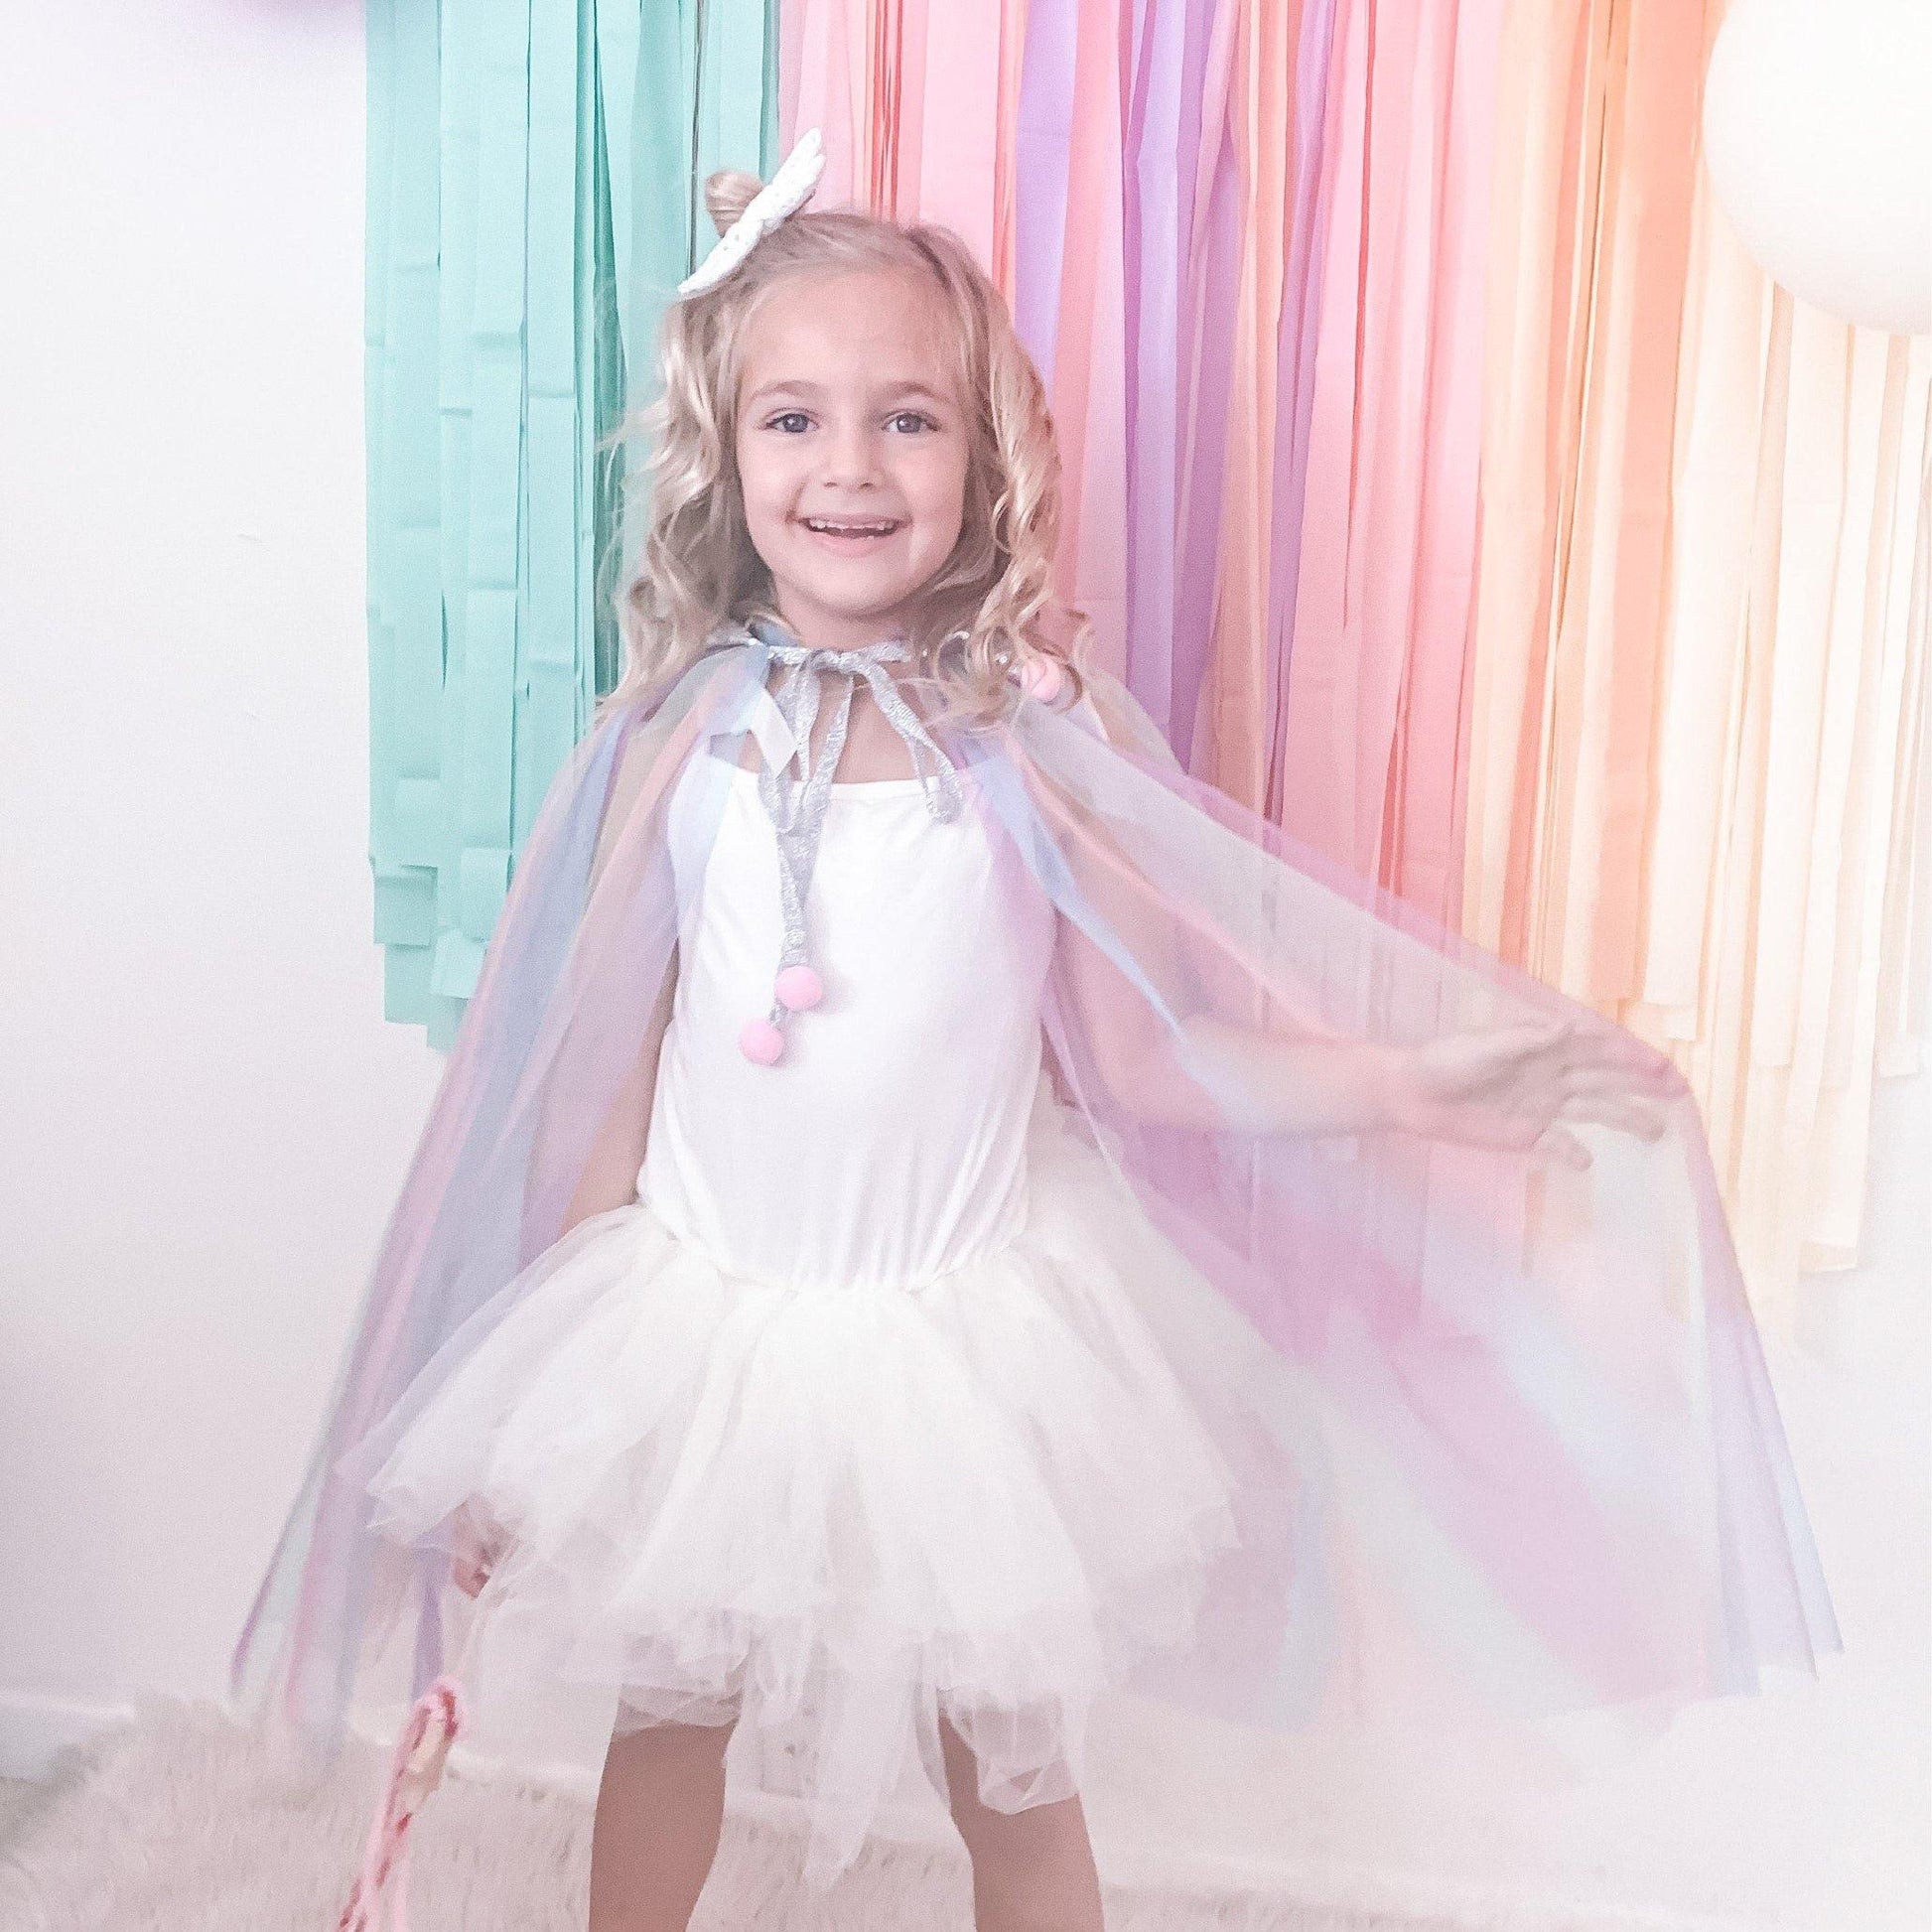 Little girl wearing a sheer rainbow cape standing against a pastel ribbon garland.